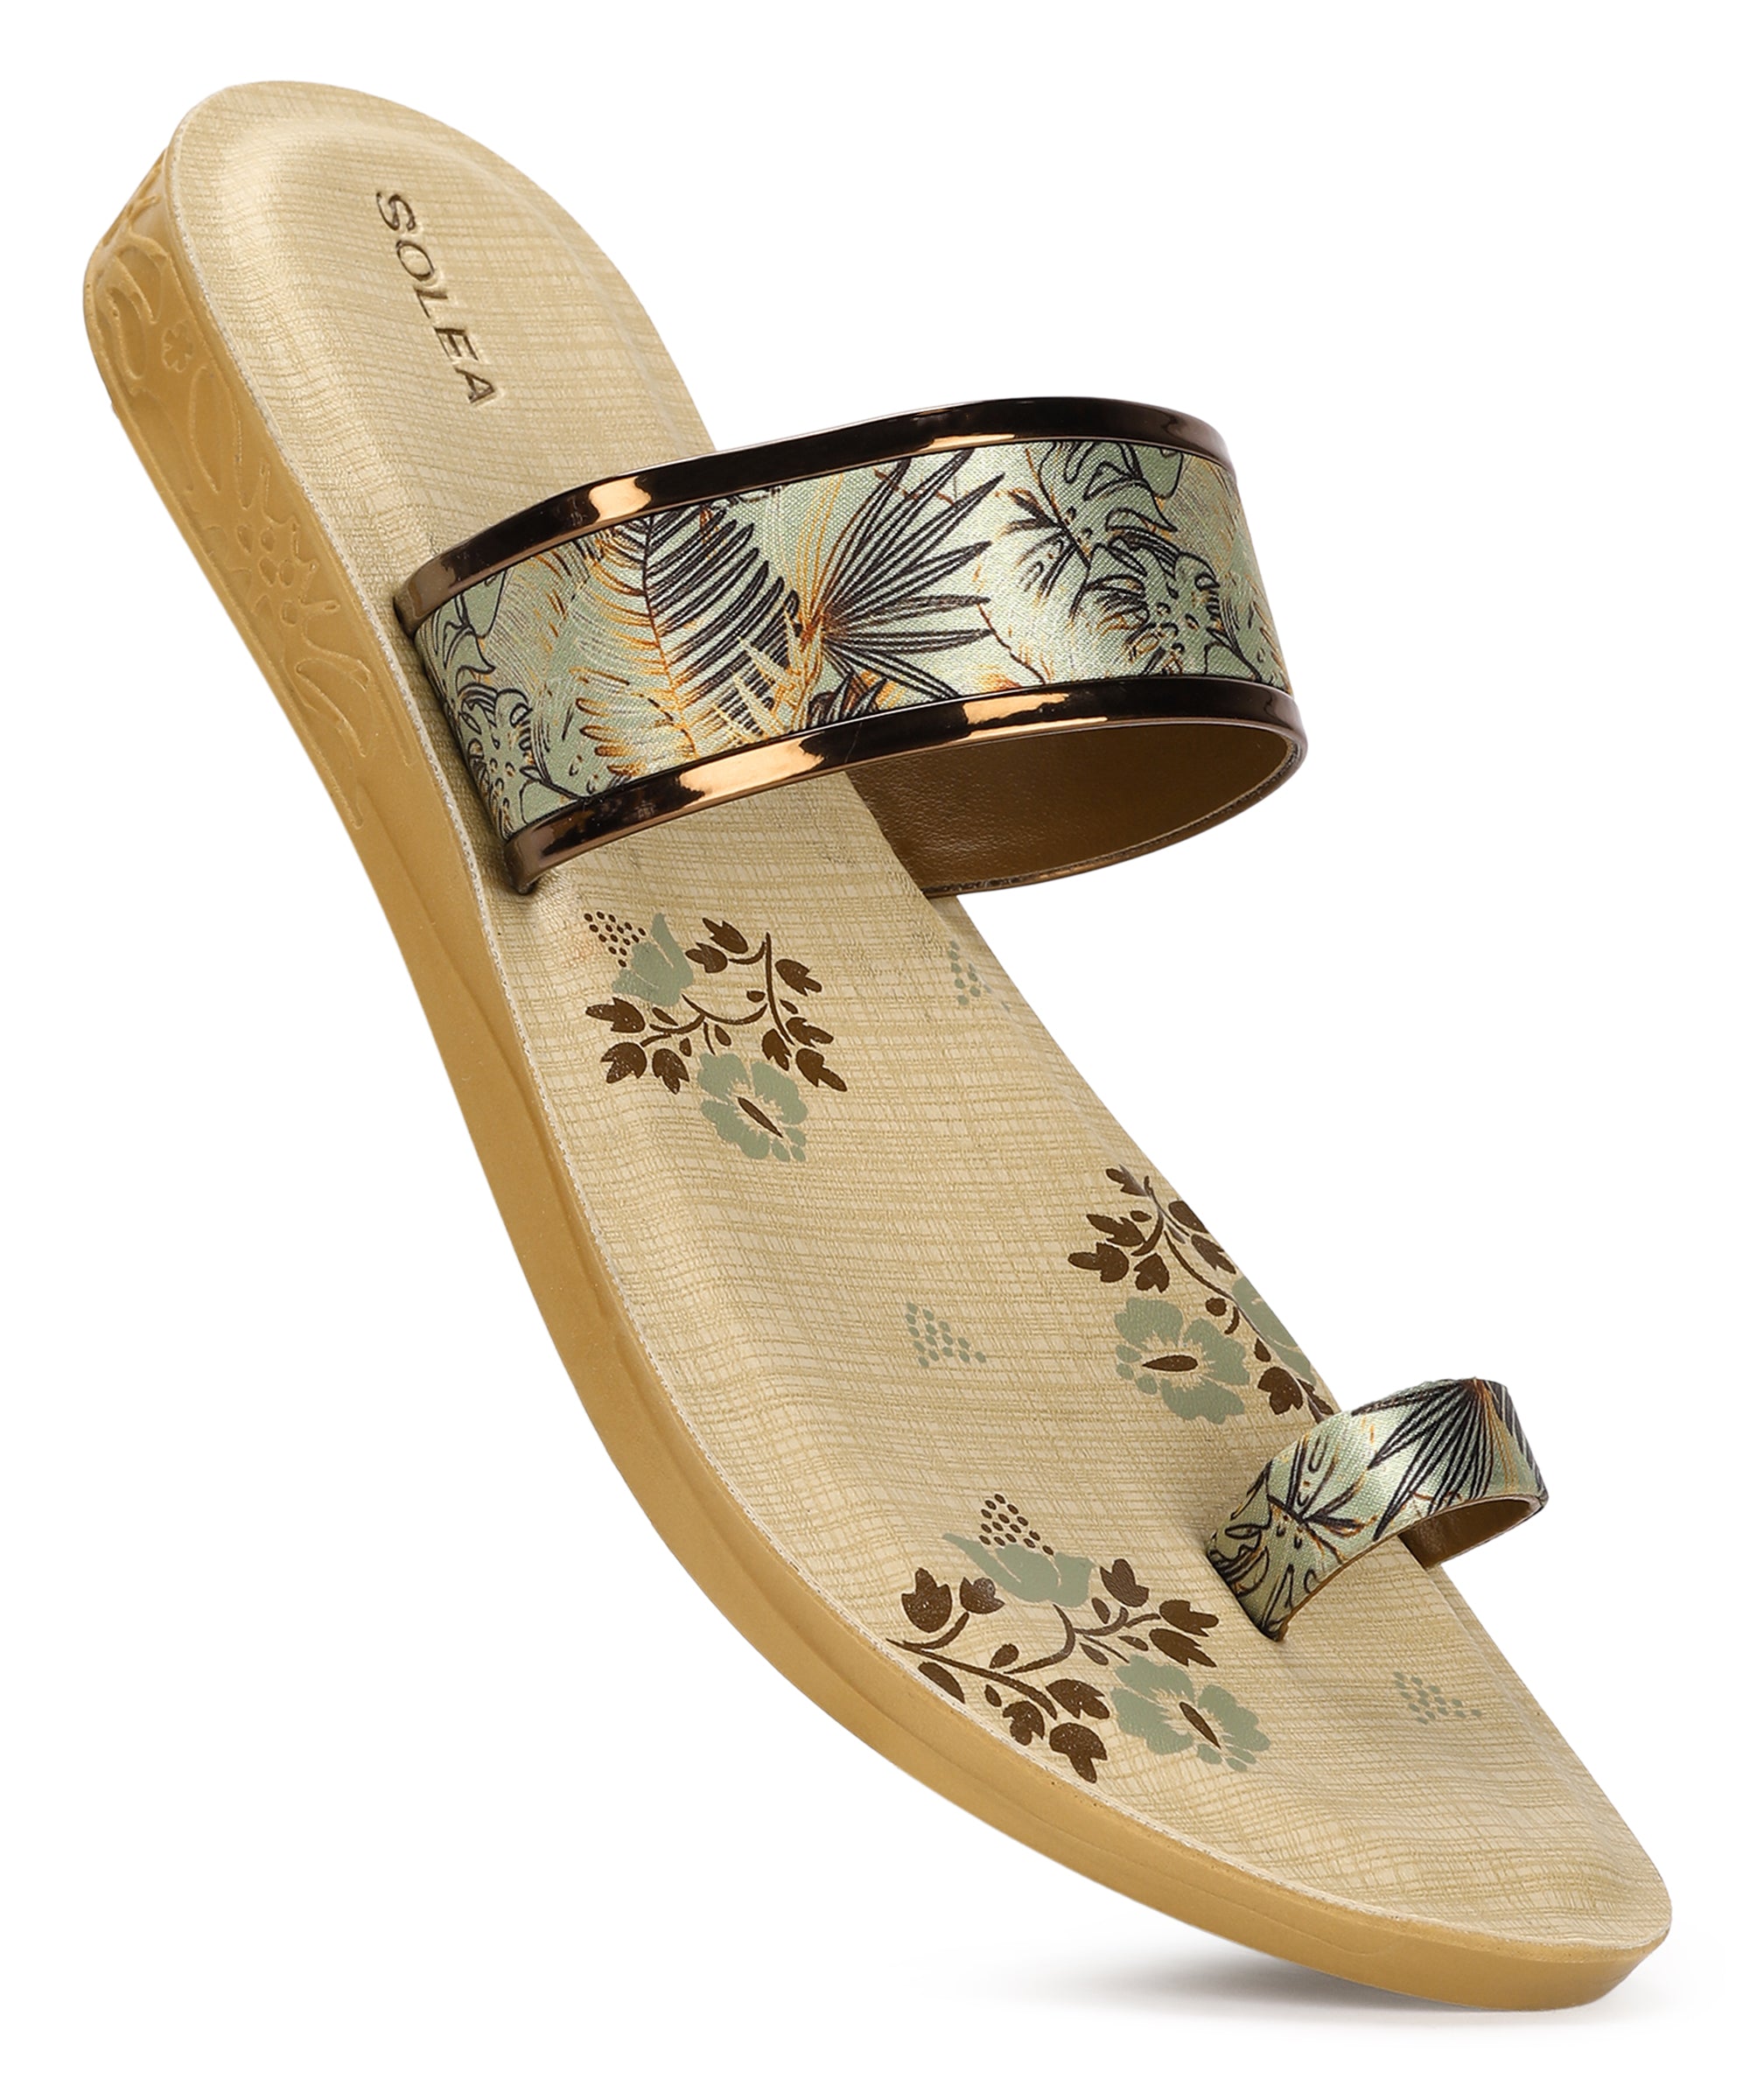 Paragon PUK7019L Women Sandals | Casual &amp; Formal Sandals | Stylish, Comfortable &amp; Durable | For Daily &amp; Occasion Wear